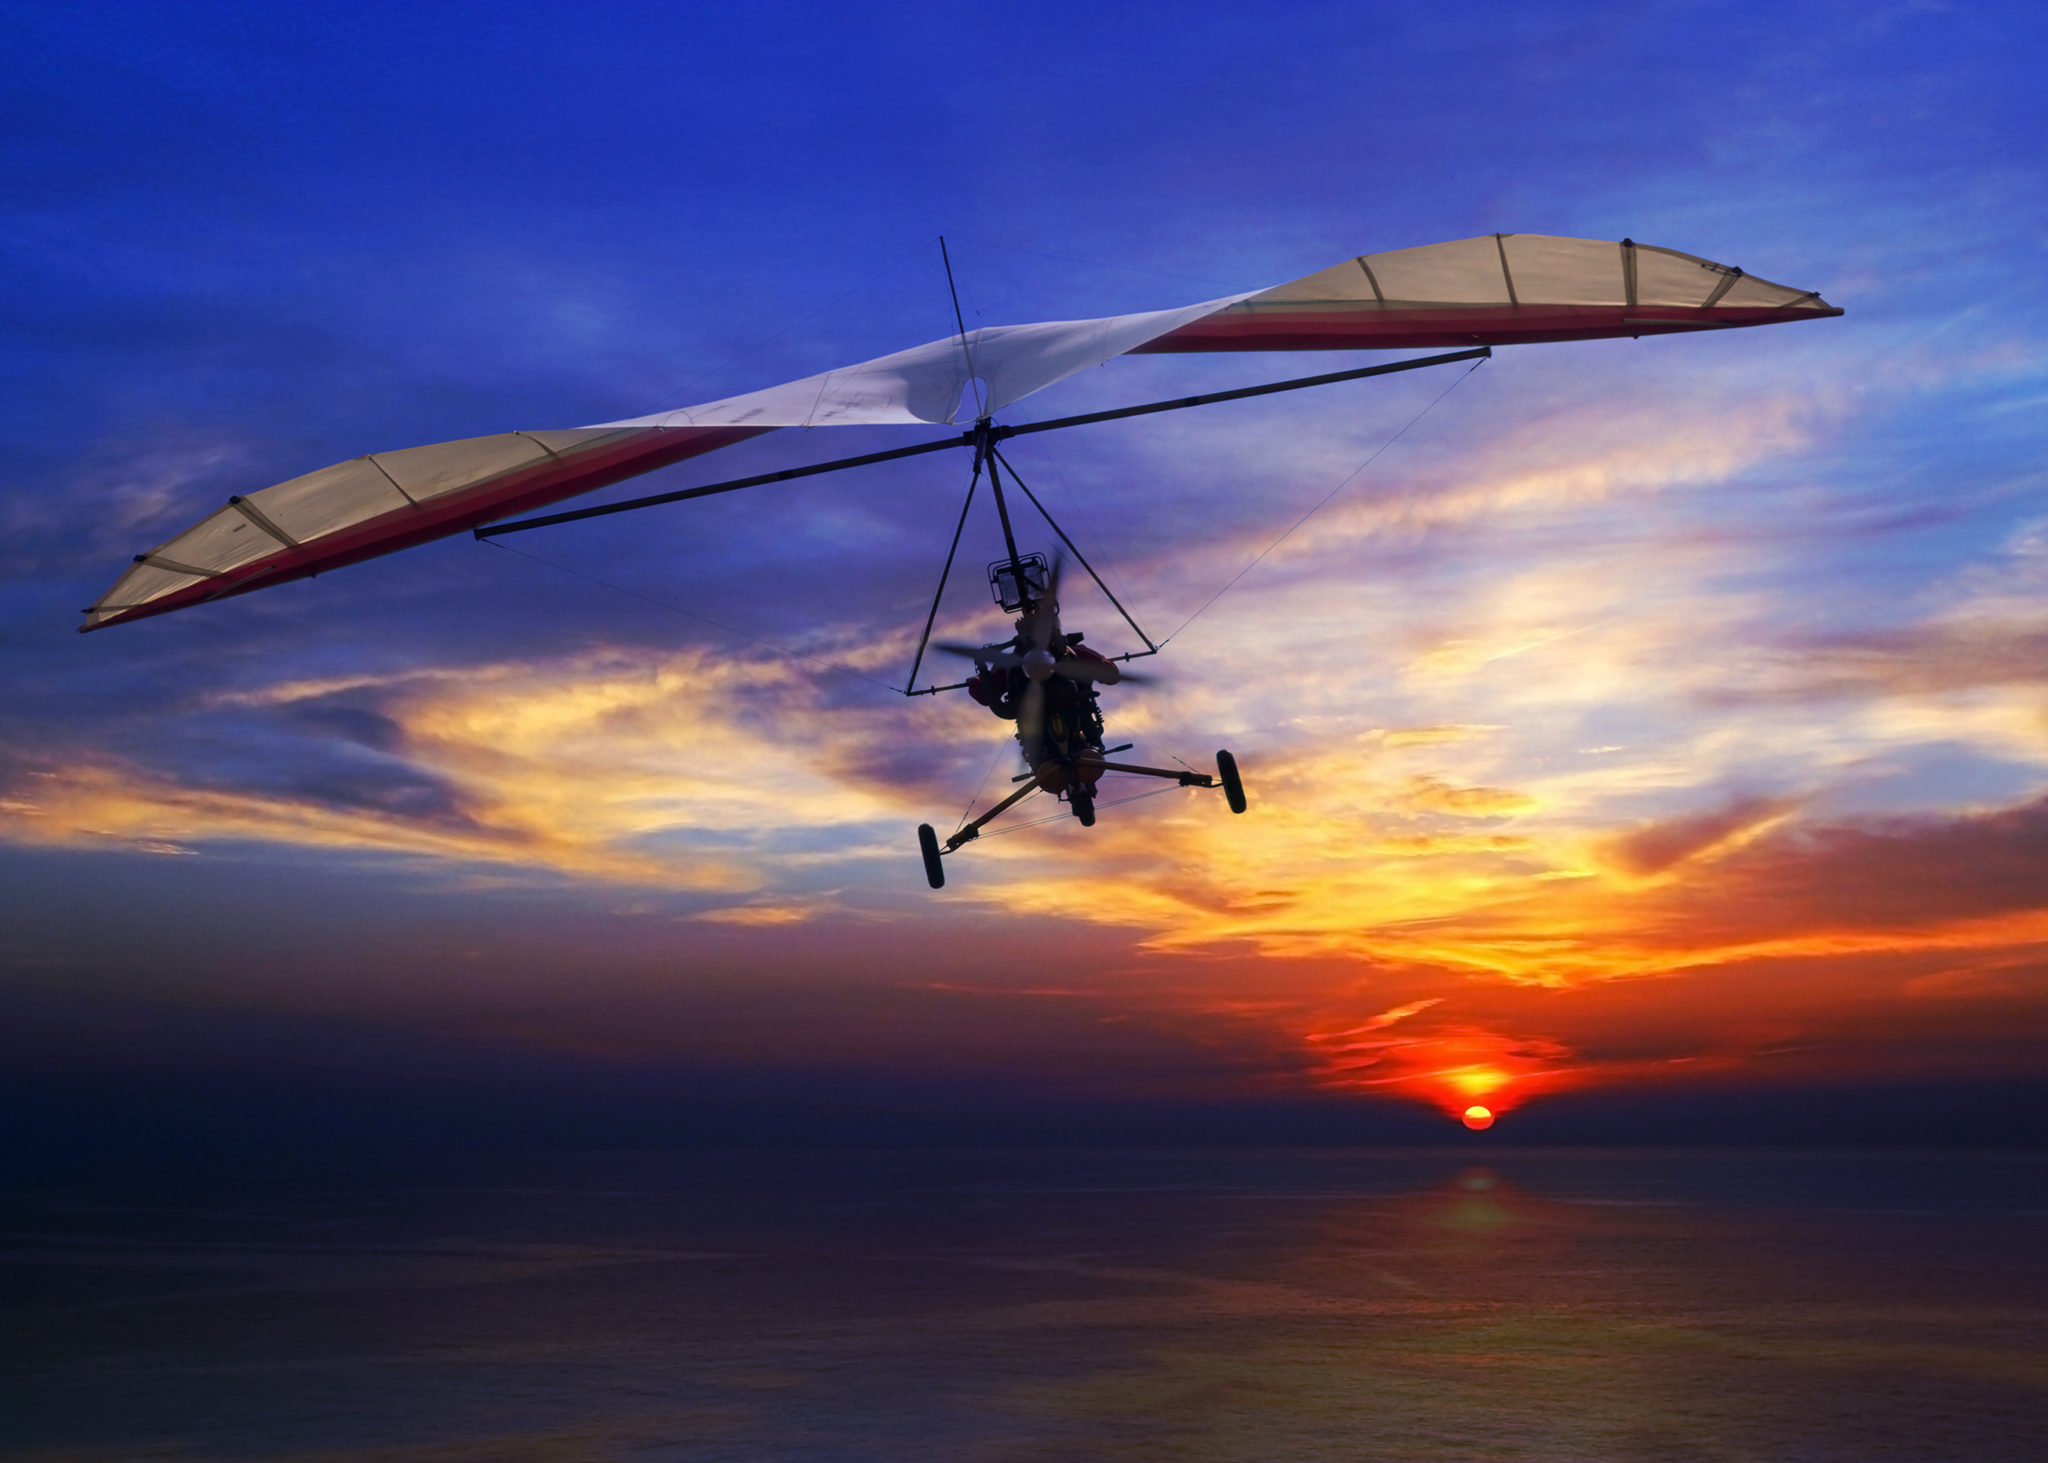 Hand glider in the sunset